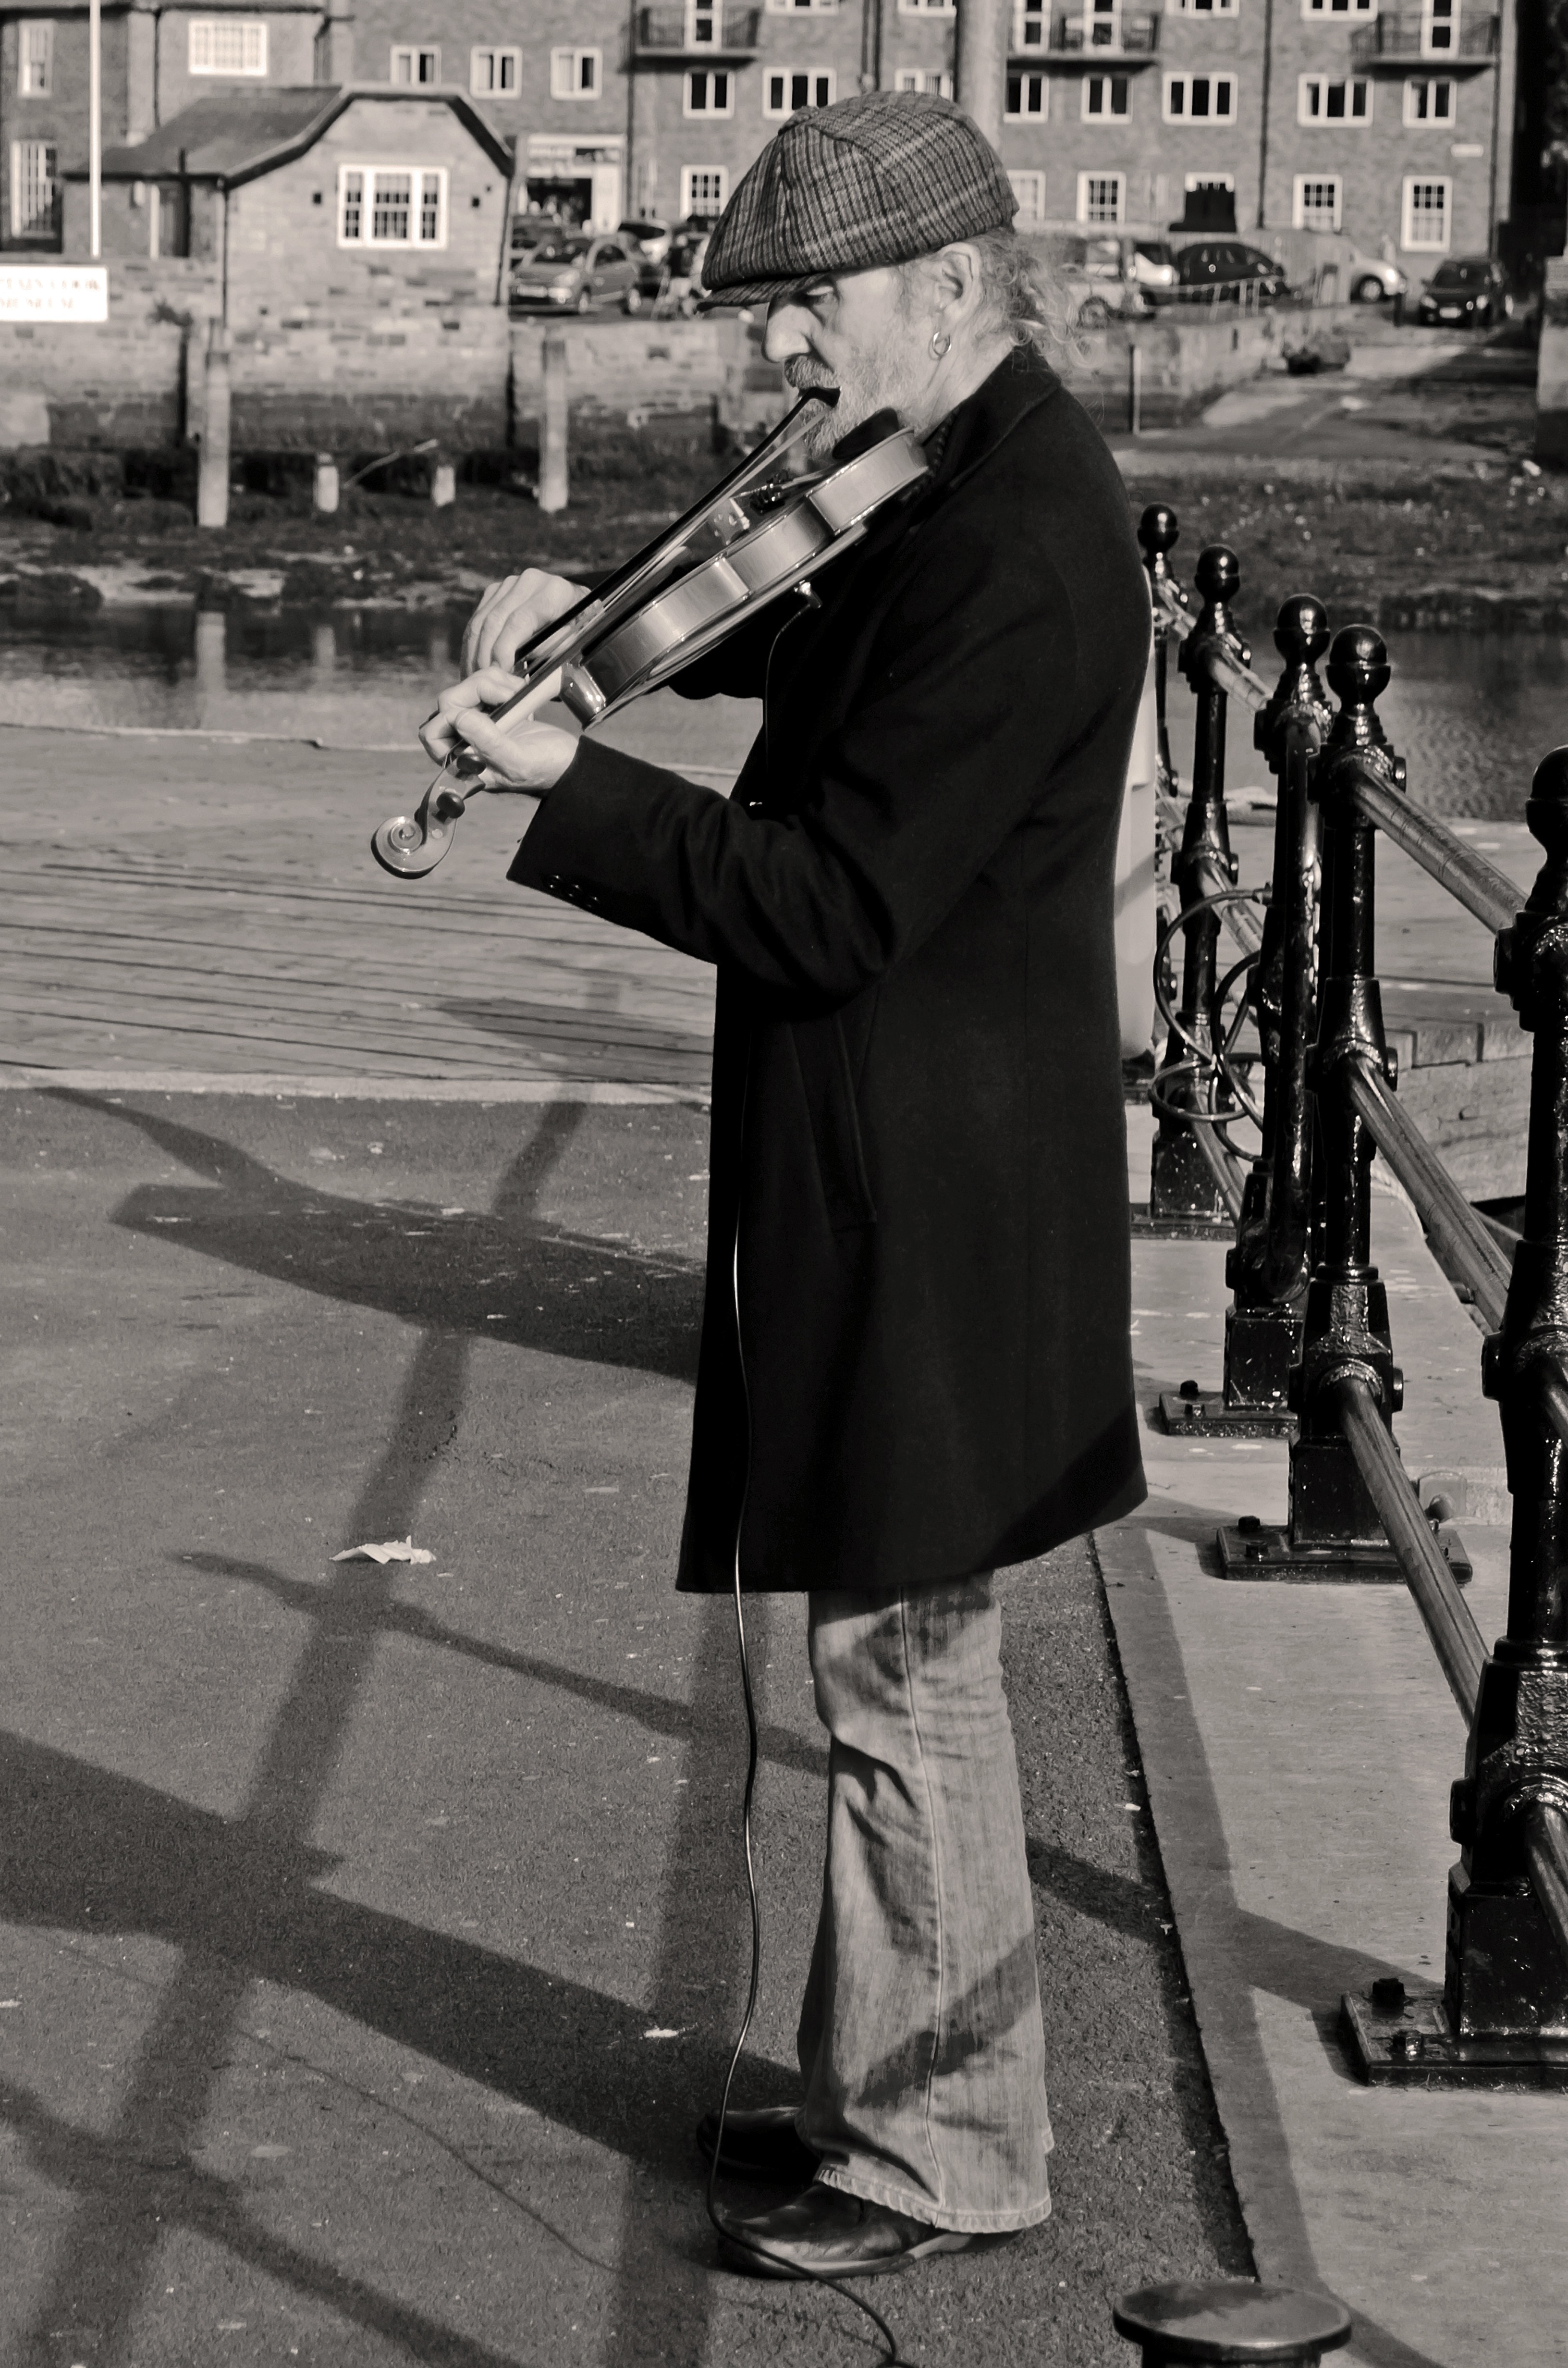 grayscale photography of man playing violin